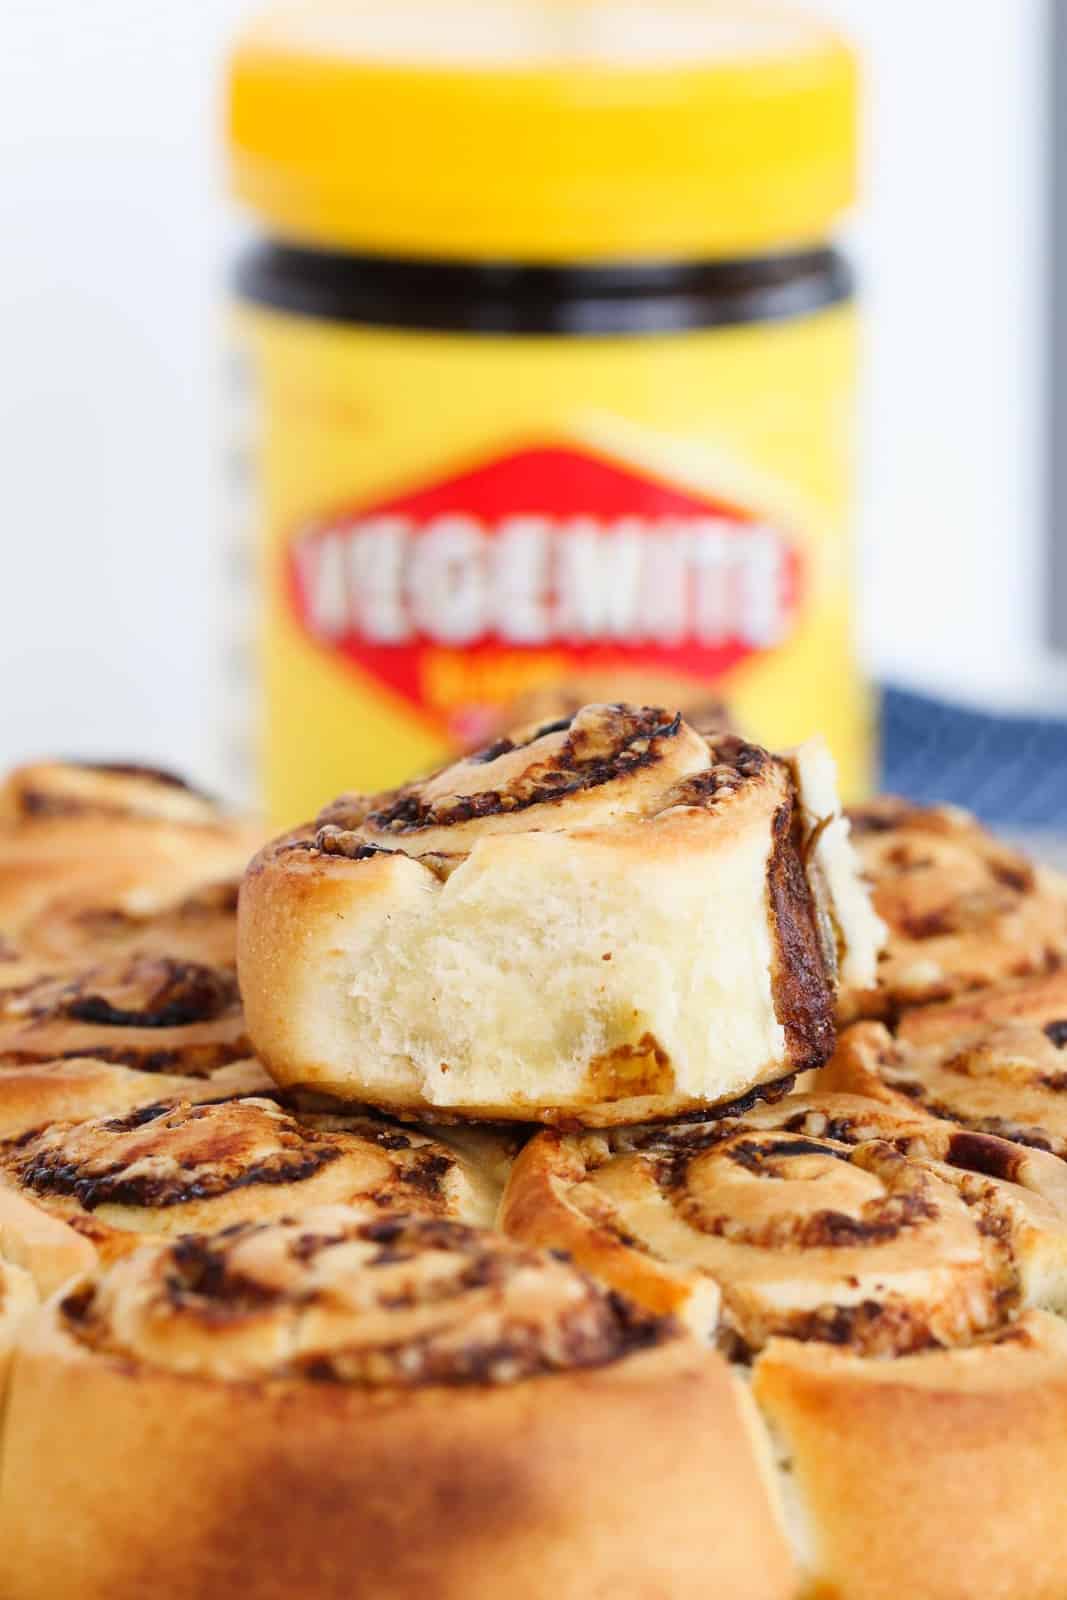 A baked scroll with a vegemite and cheese filling sitting on top of a layer of scrolls in front of a Vegemite jar.